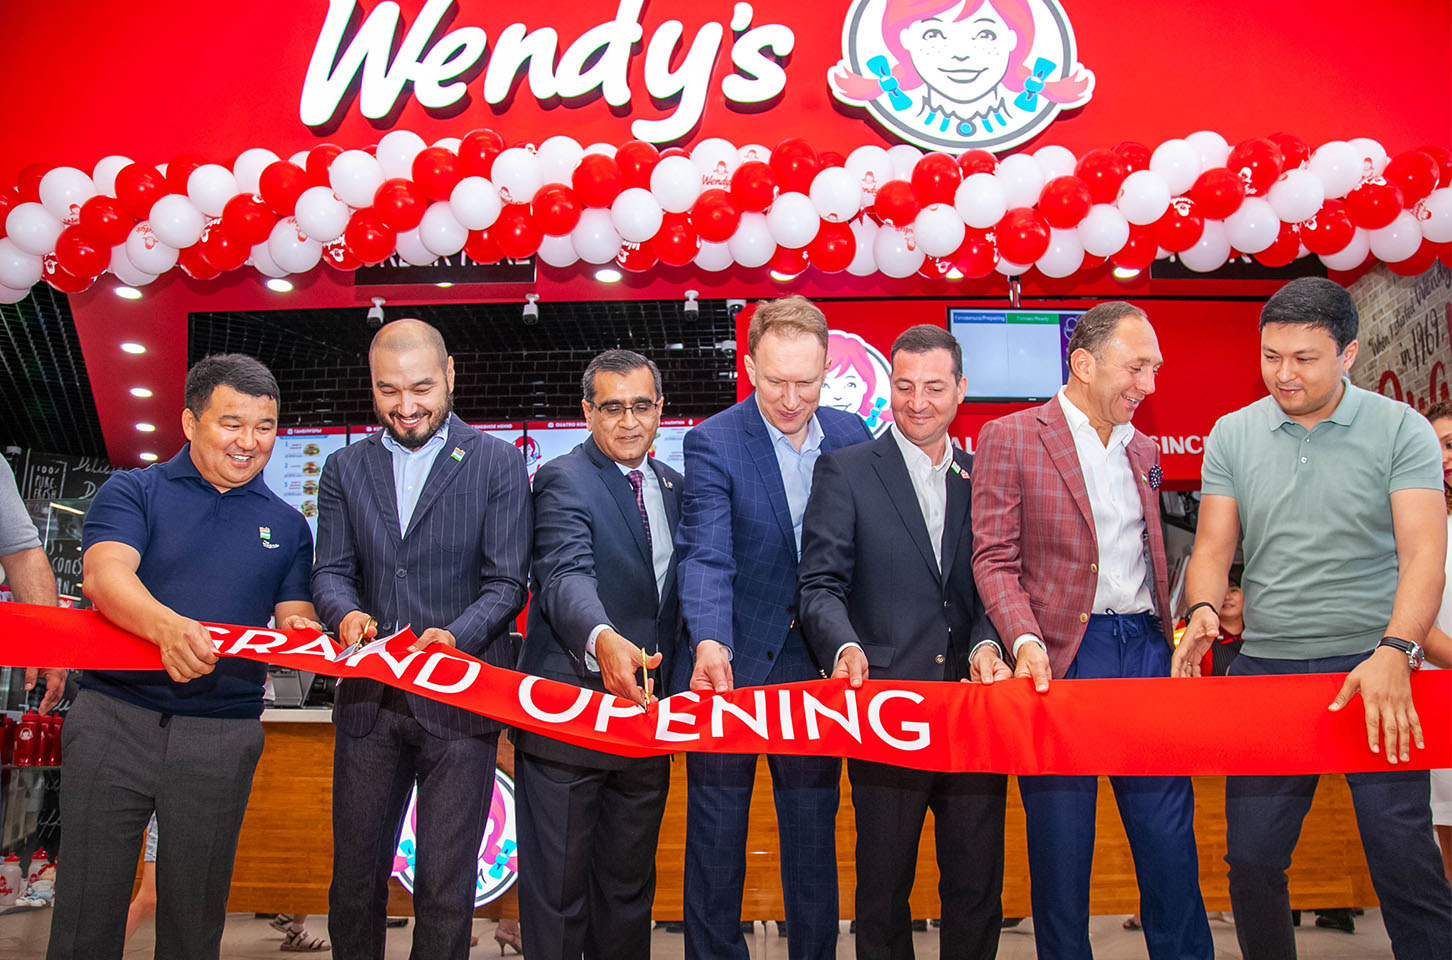 Kusto brings Wendy’s to Central Asia